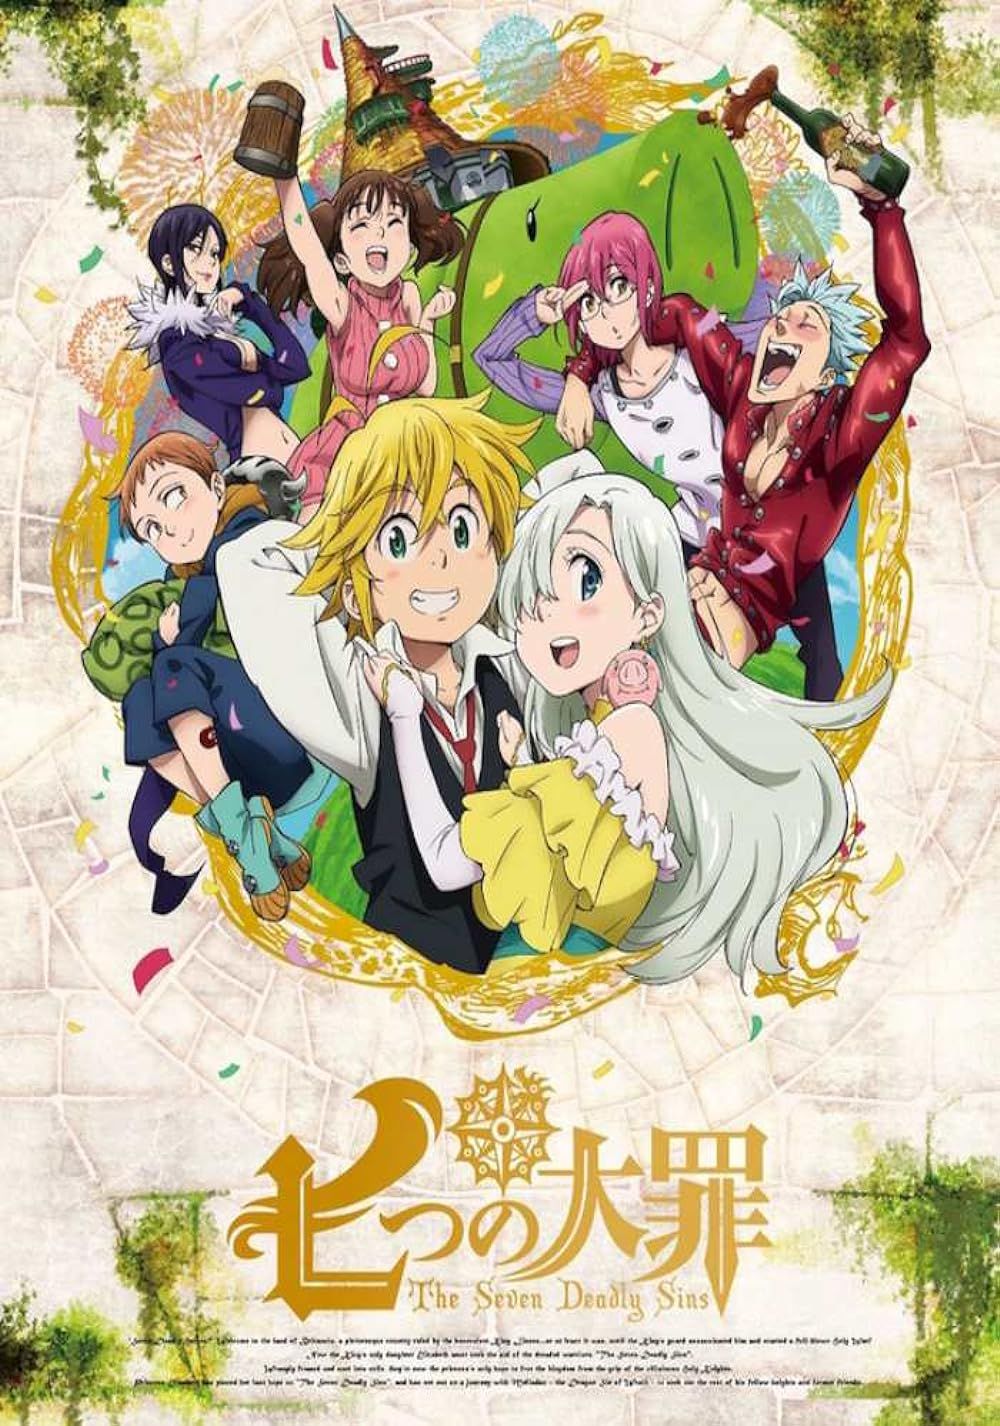 The Seven Deadly Sins anime poster featuring Meliodas and the rest of the main cast